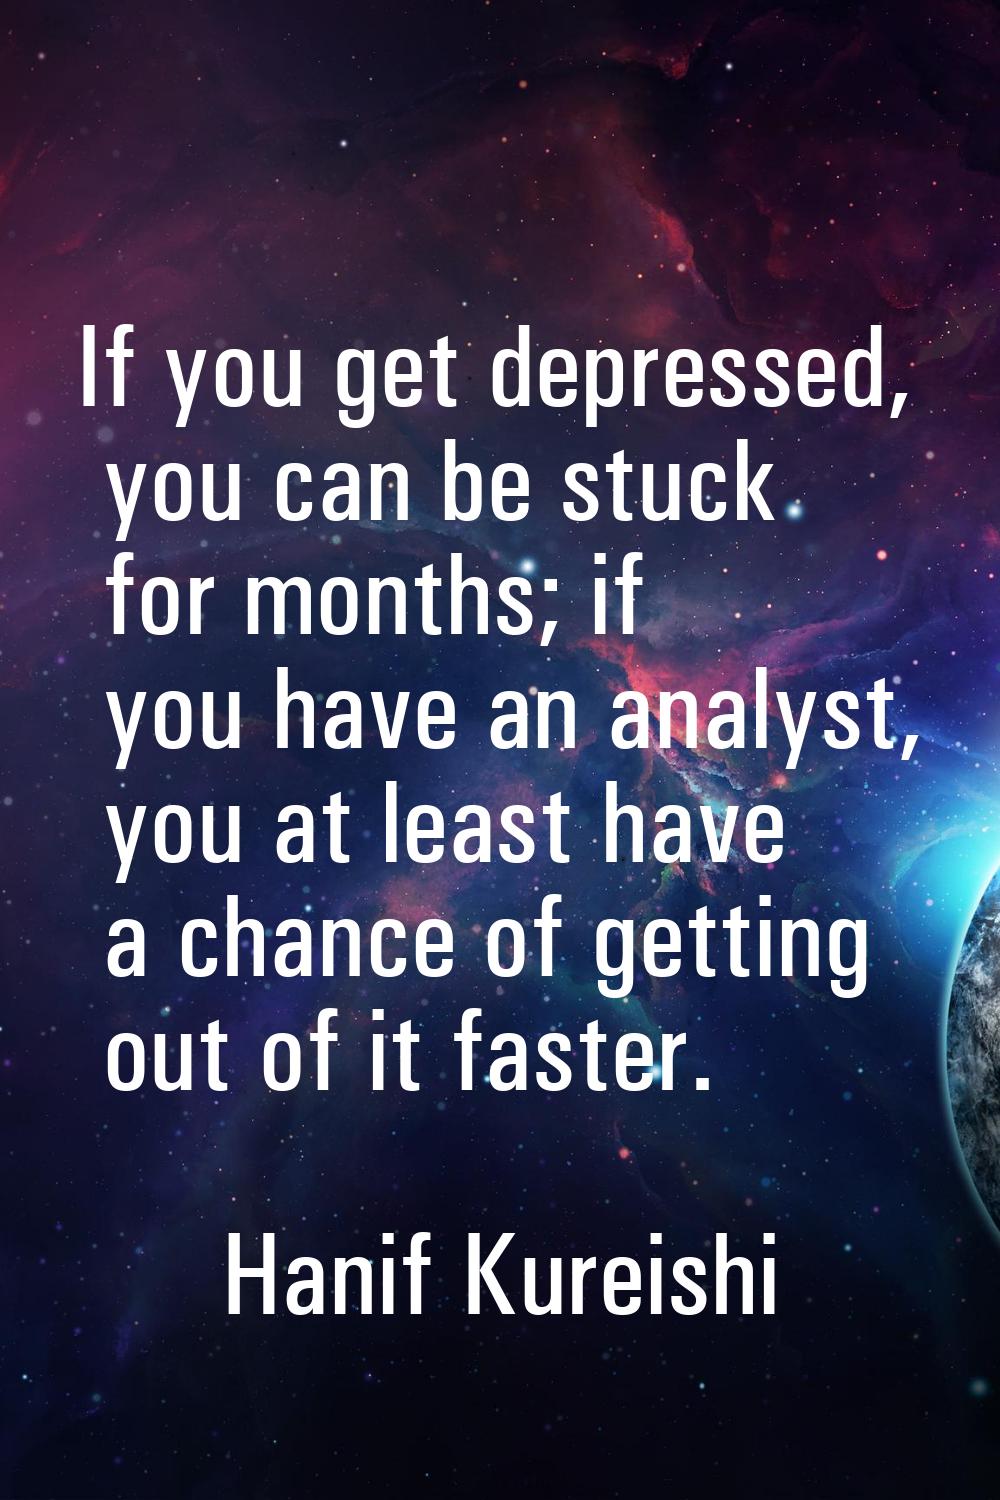 If you get depressed, you can be stuck for months; if you have an analyst, you at least have a chan